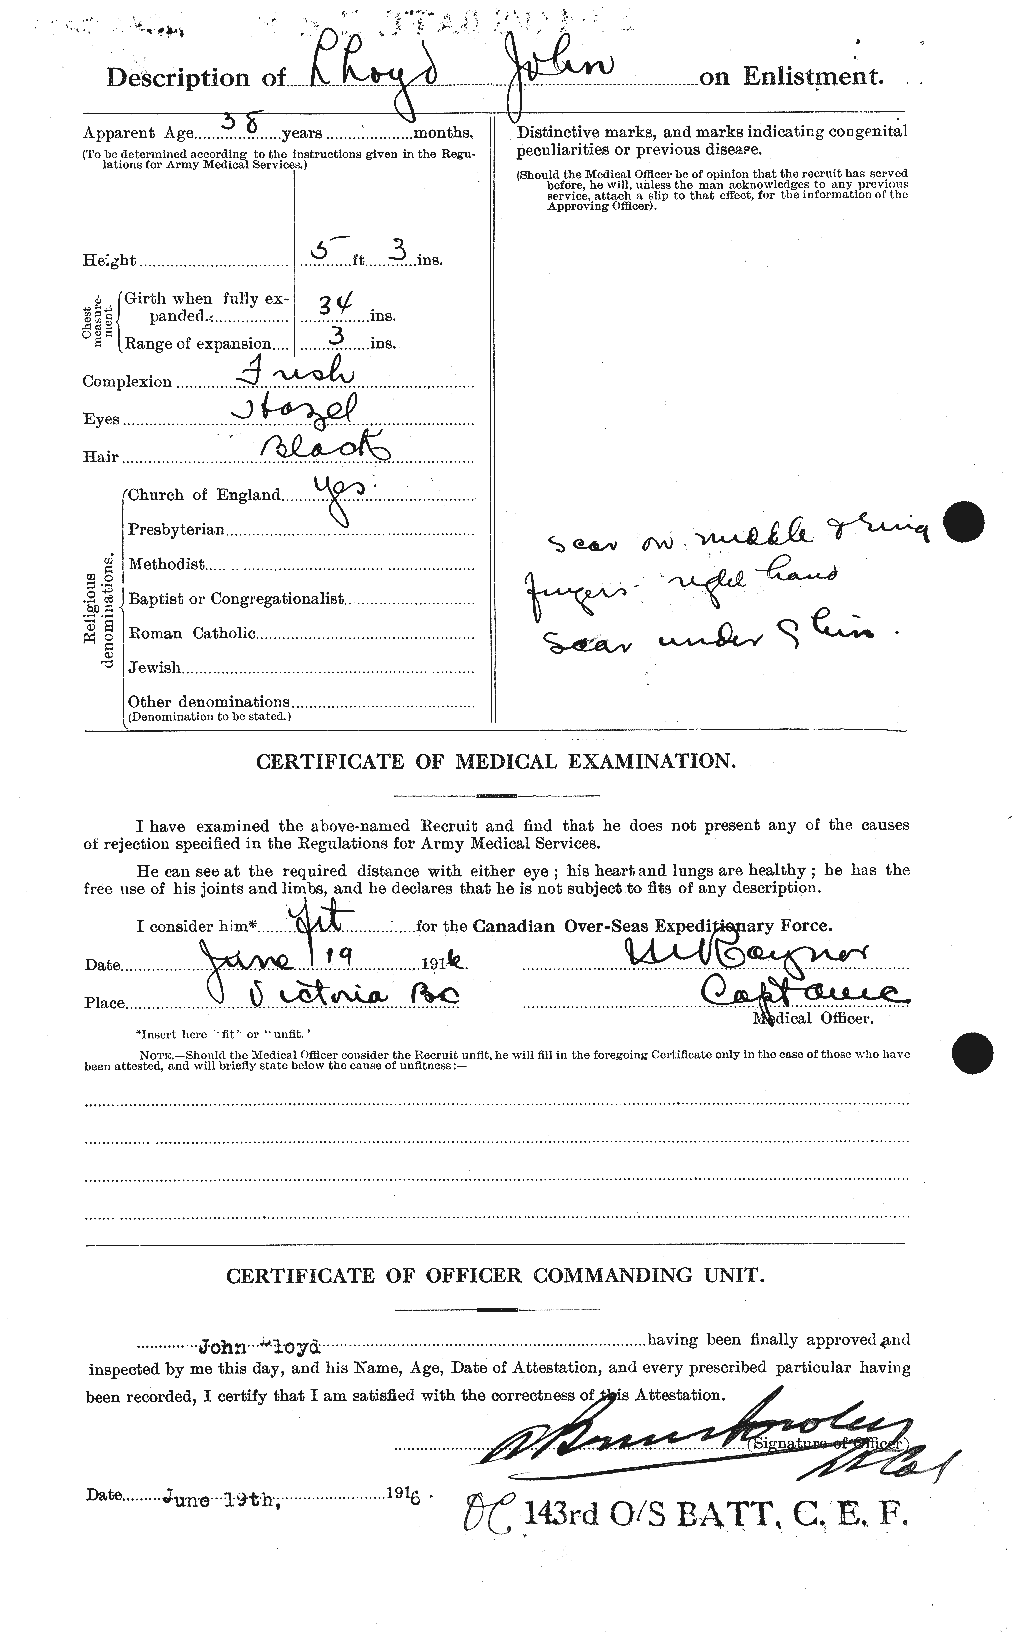 Personnel Records of the First World War - CEF 469161b